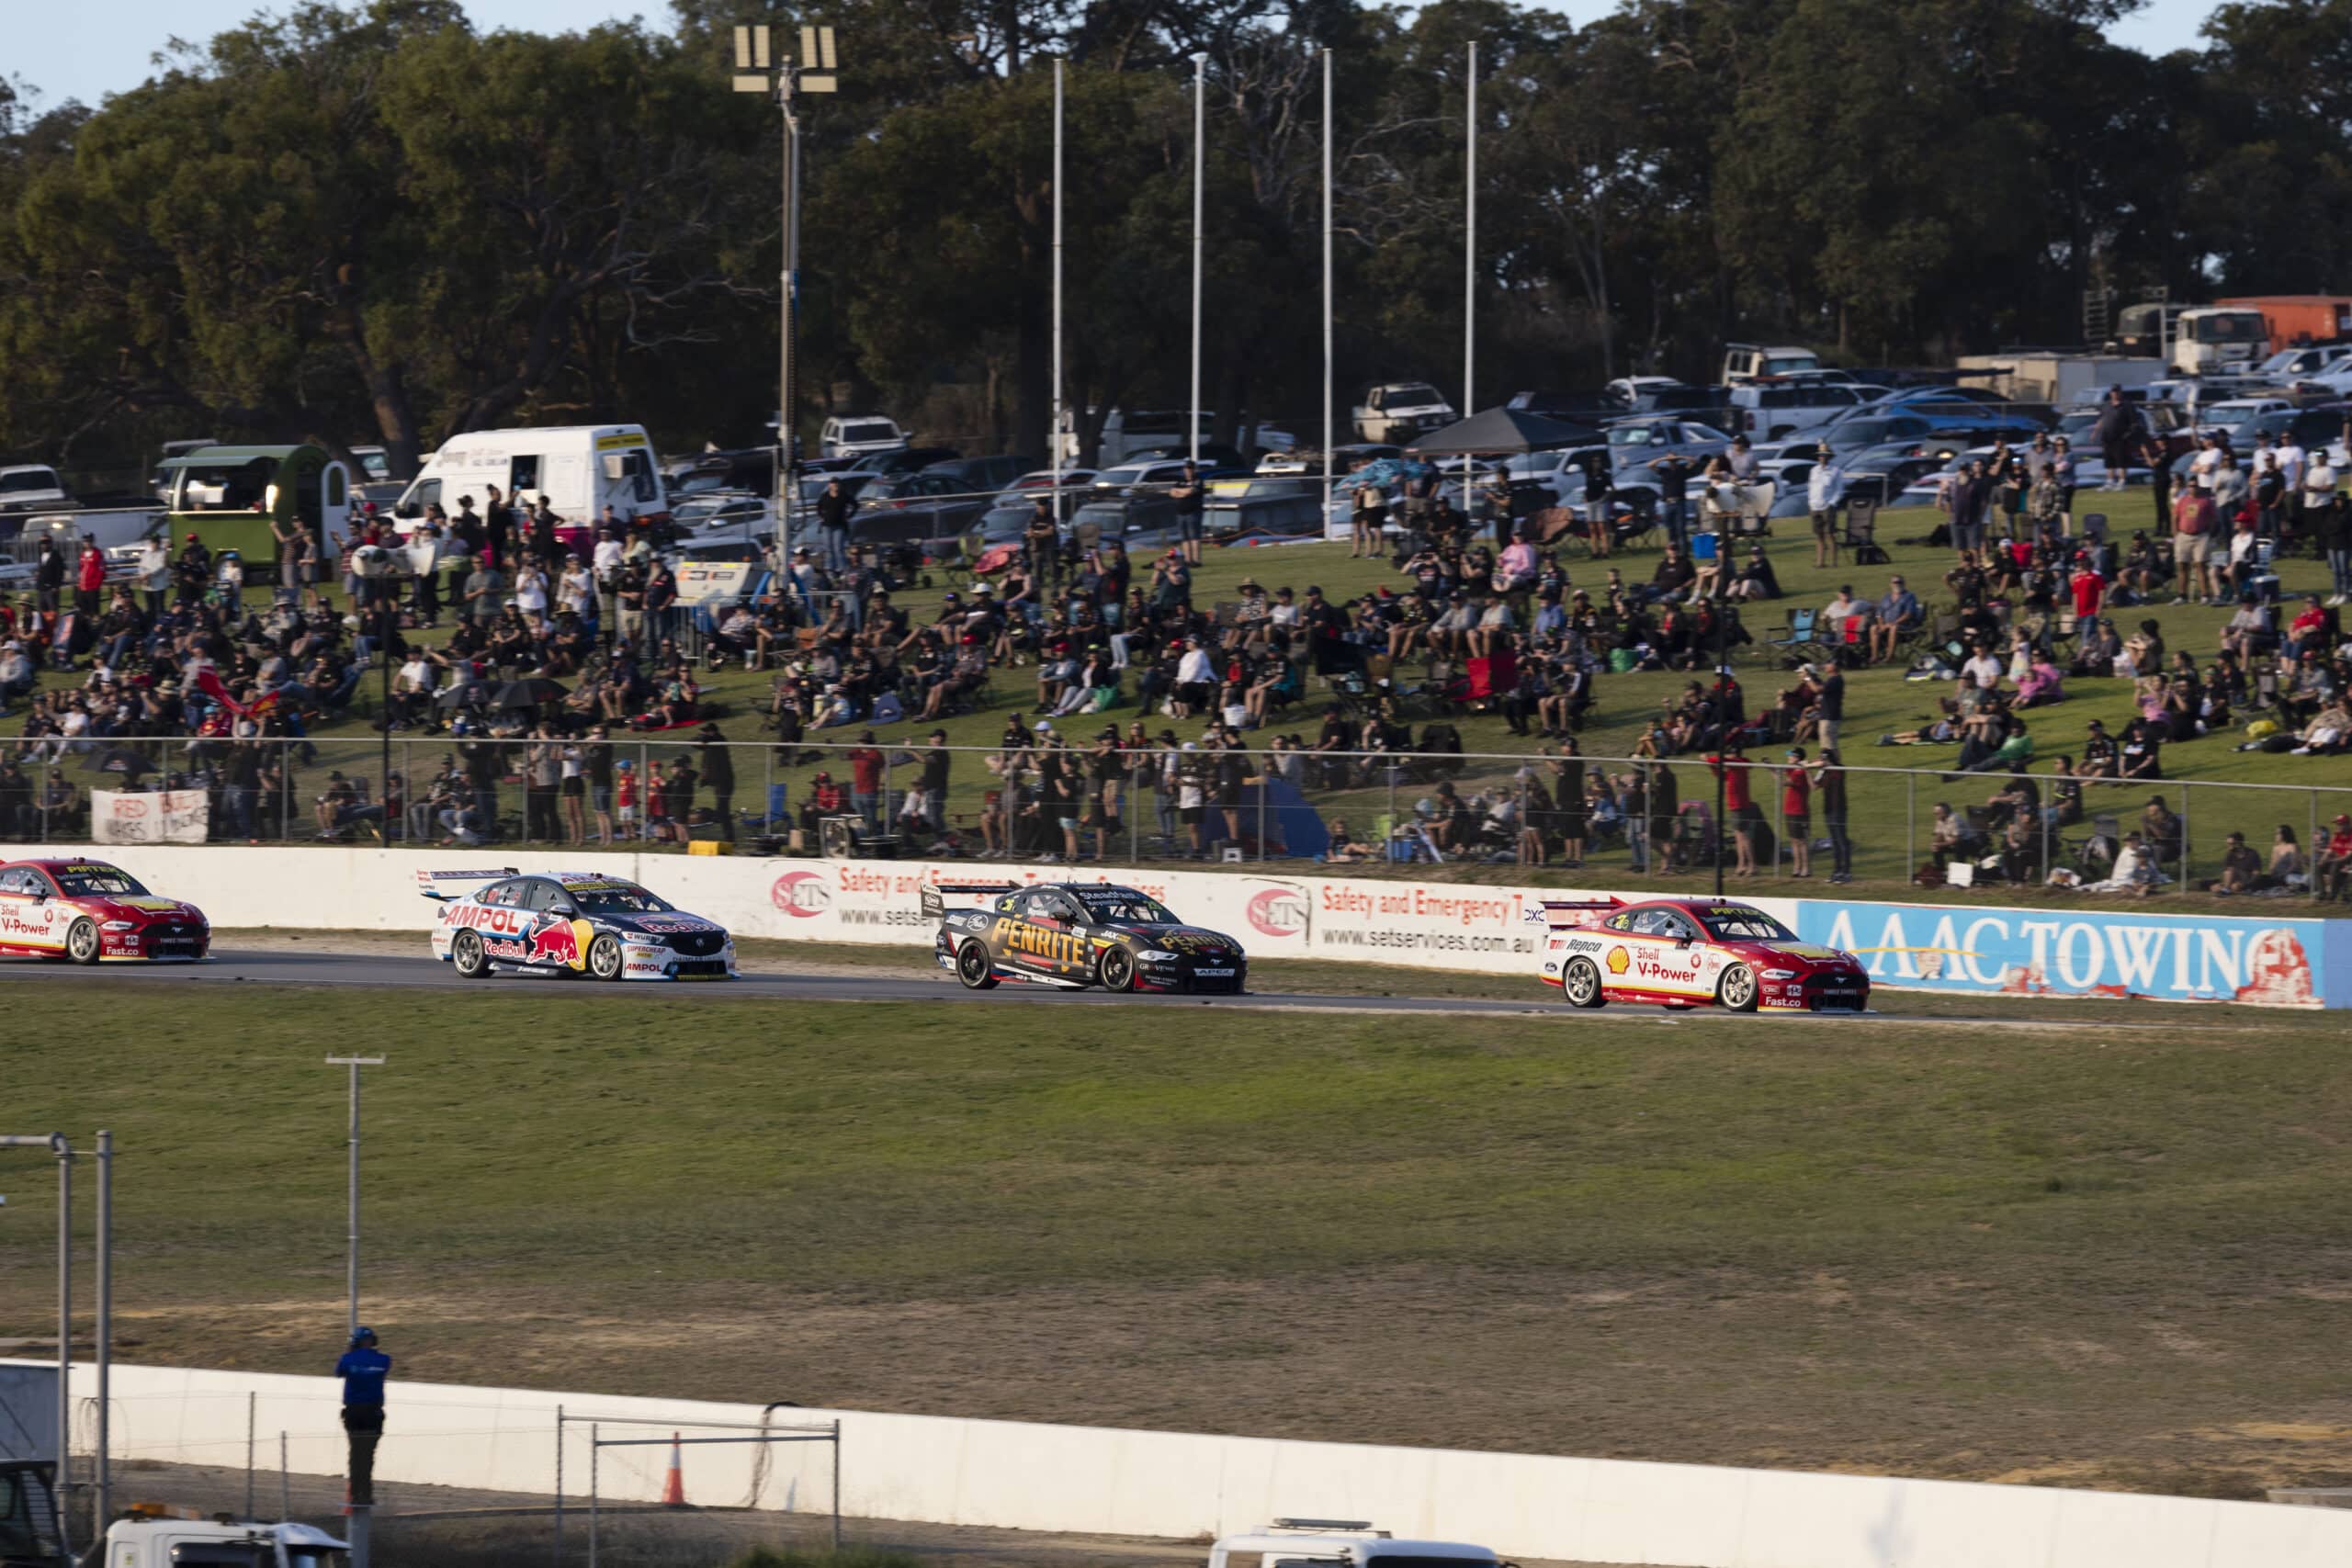 Event 4 of the Repco Supercars Championship, Wanneroo, Perth, Australia. 1 May 2022